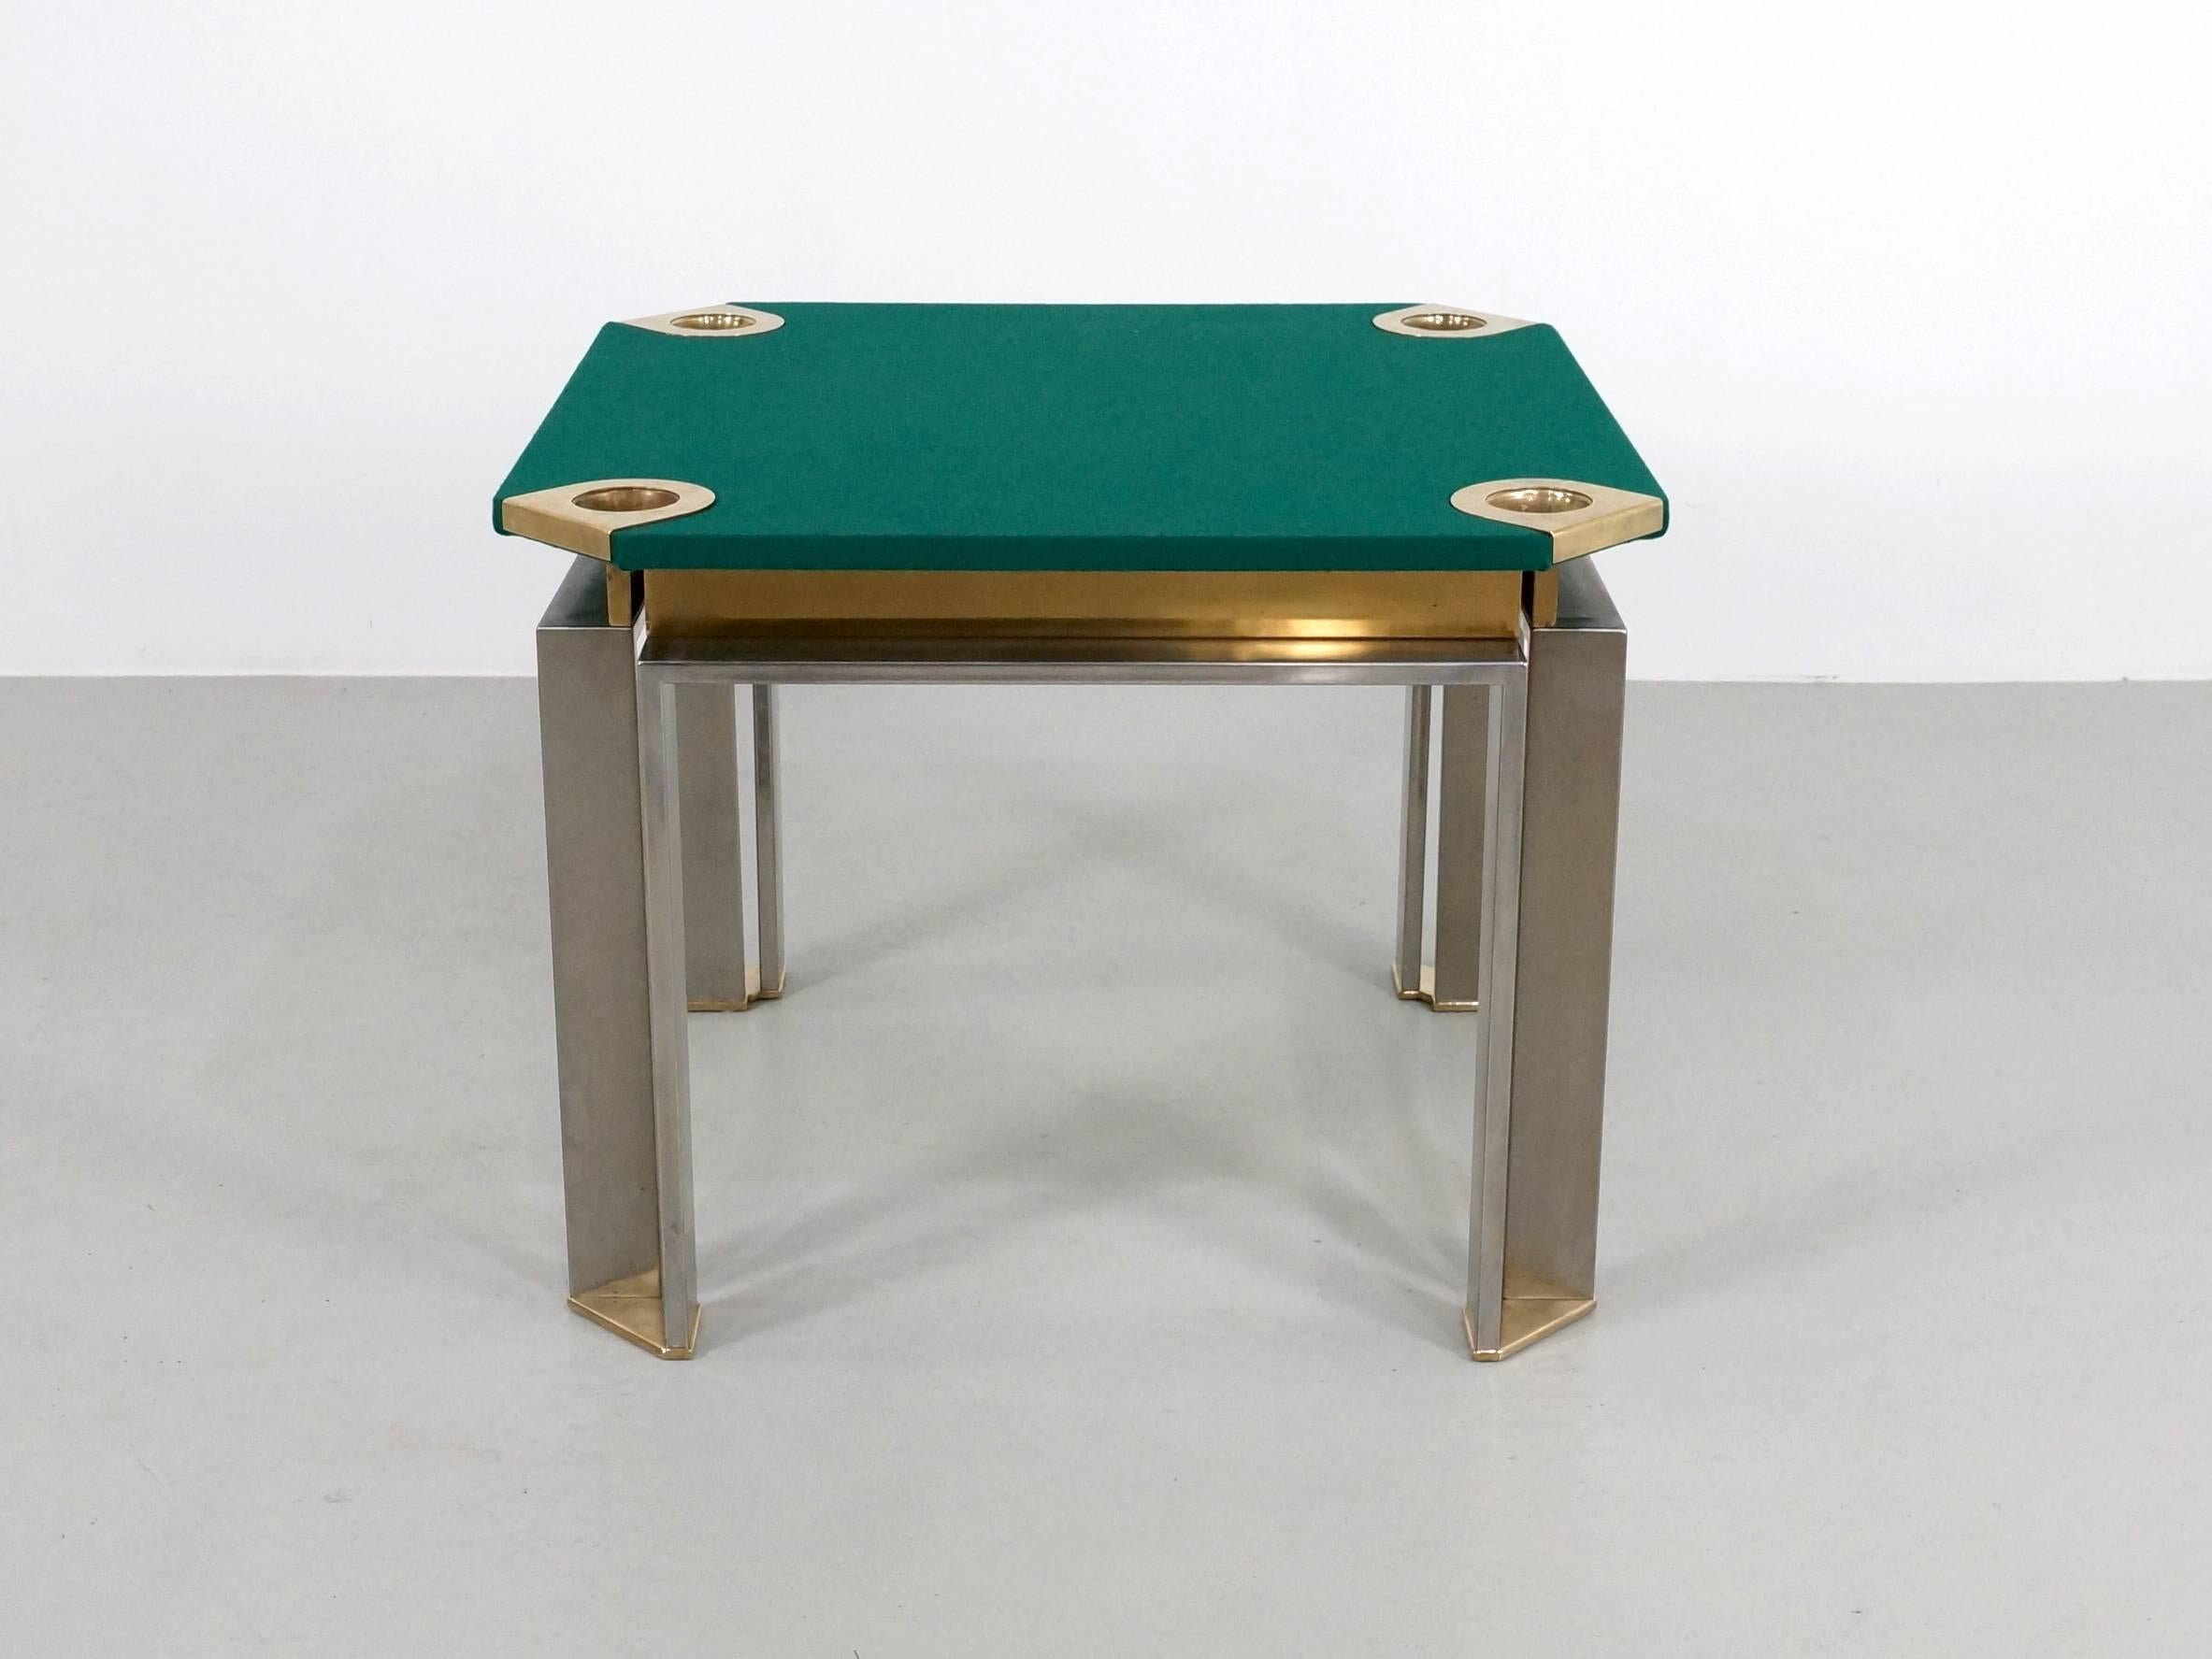 Italian Game Table by Romeo Rega in Brass and Stainless Steel